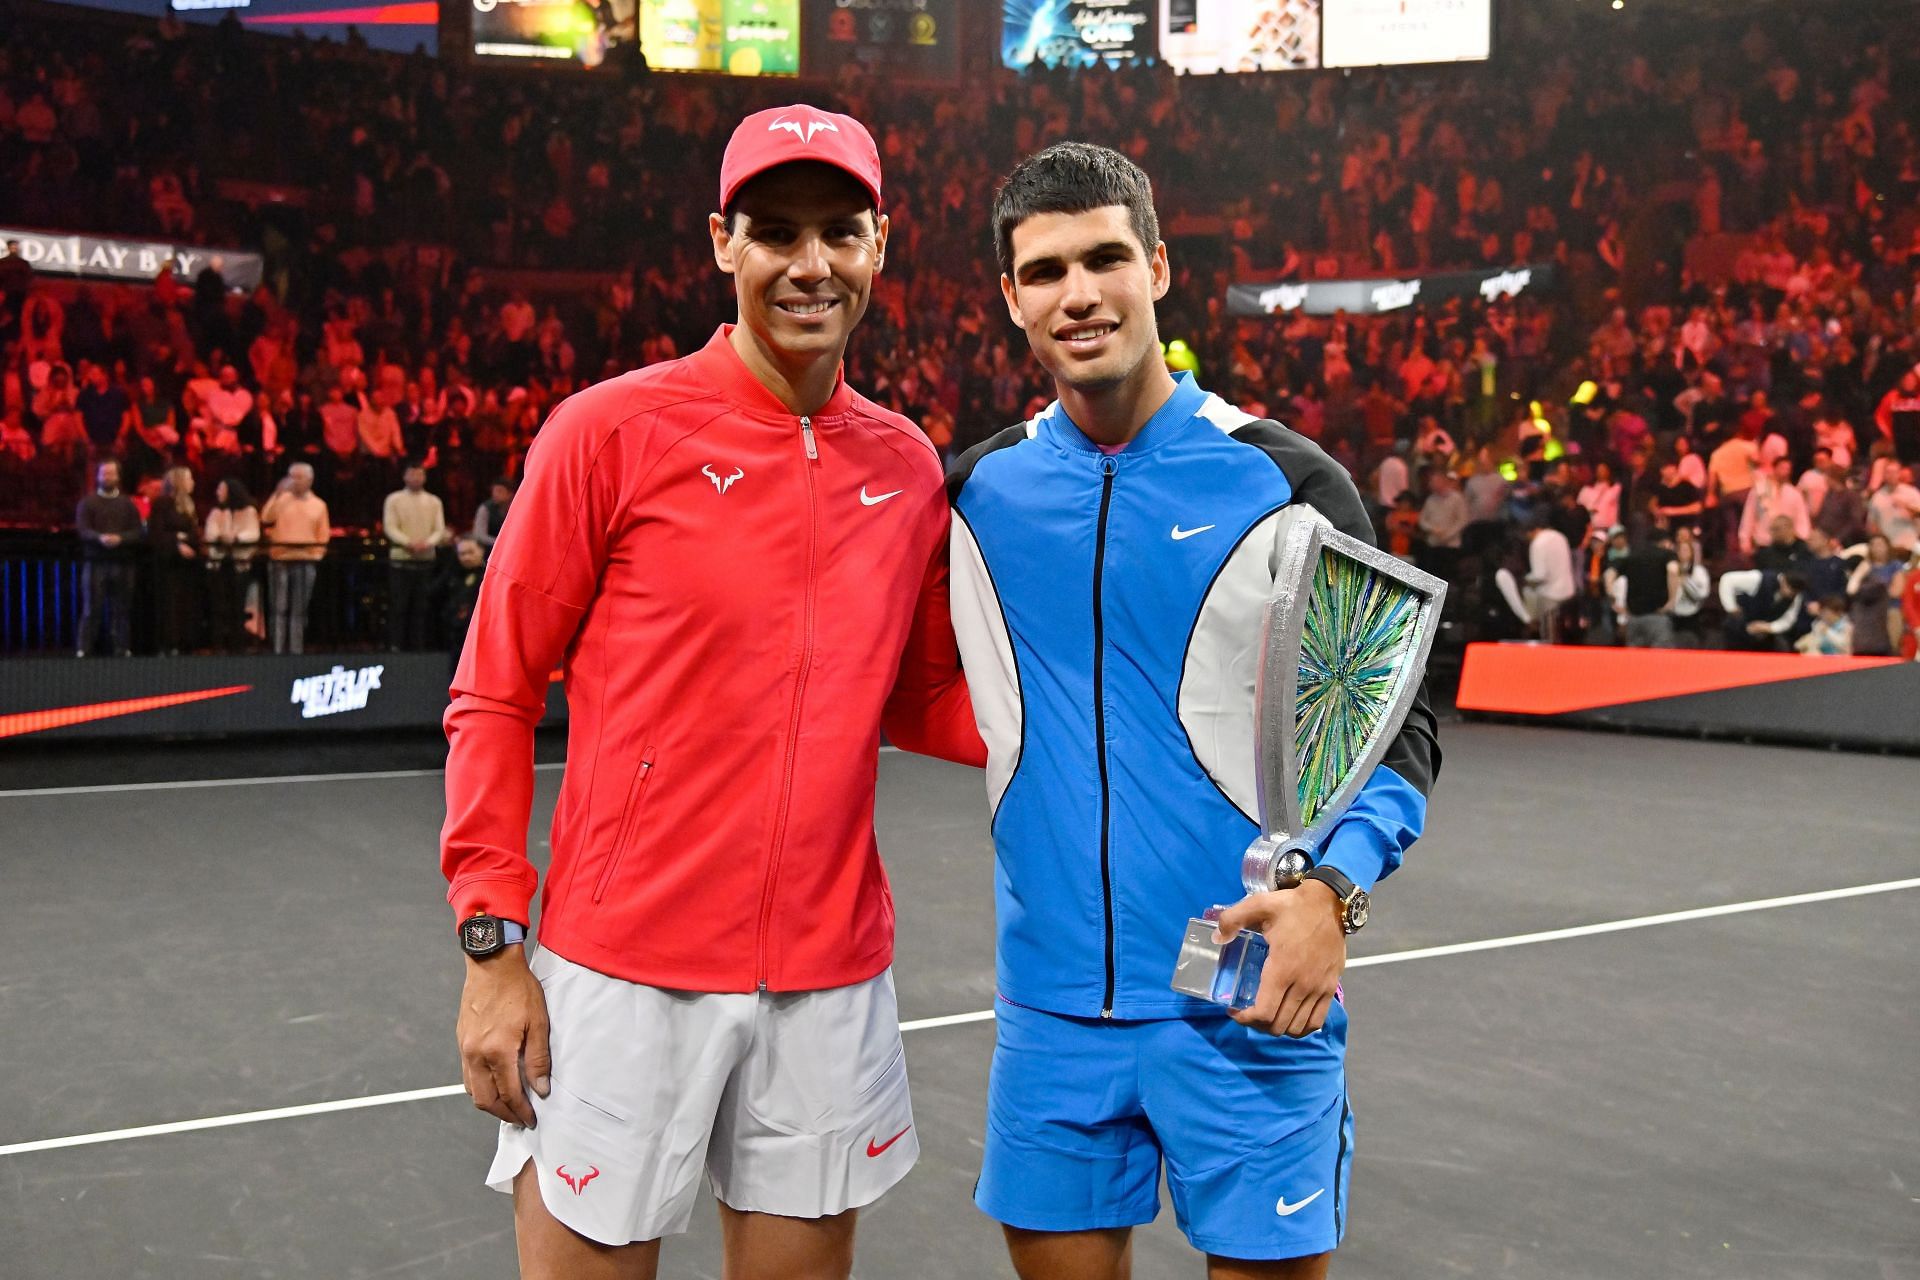 Rafael Nadal posing with a young Carlos Alcaraz goes viral ahead of pair's doubles campaign at Paris Olympics 2024